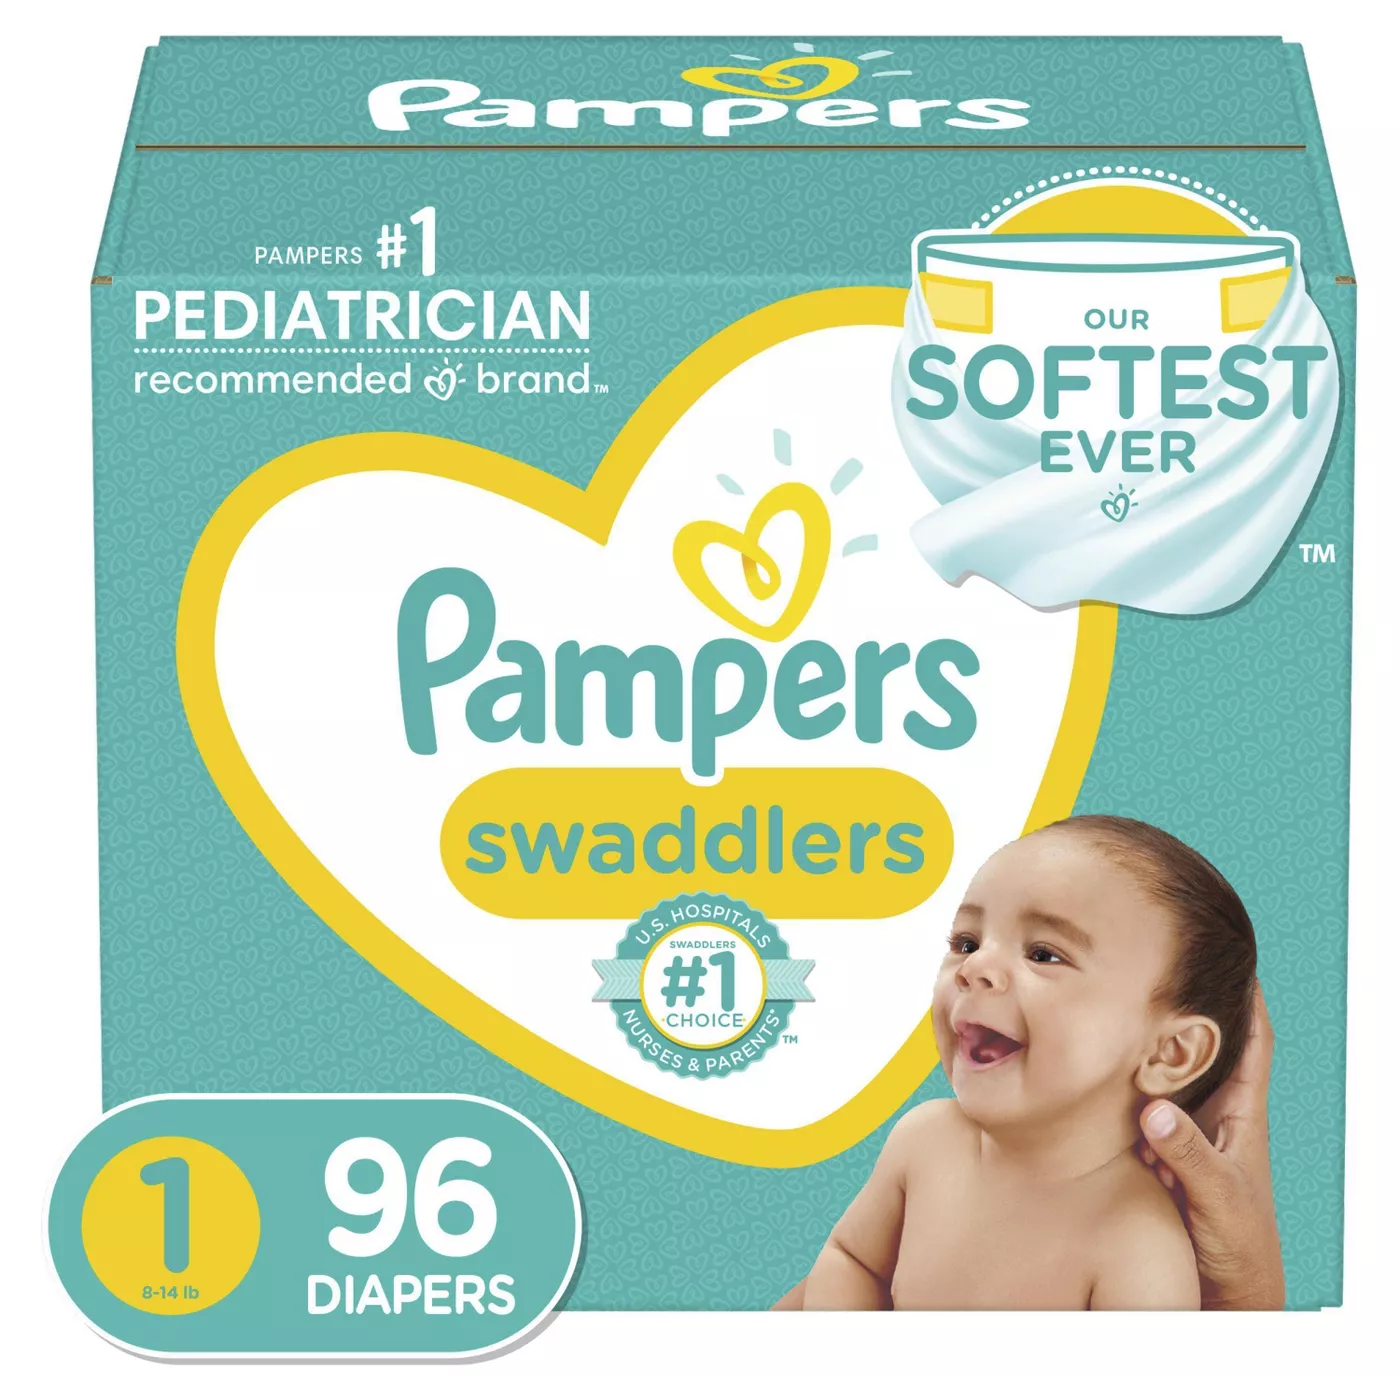 Pampers Swaddlers Disposable Diapers - (Select Size and Count) - image 1 of 16